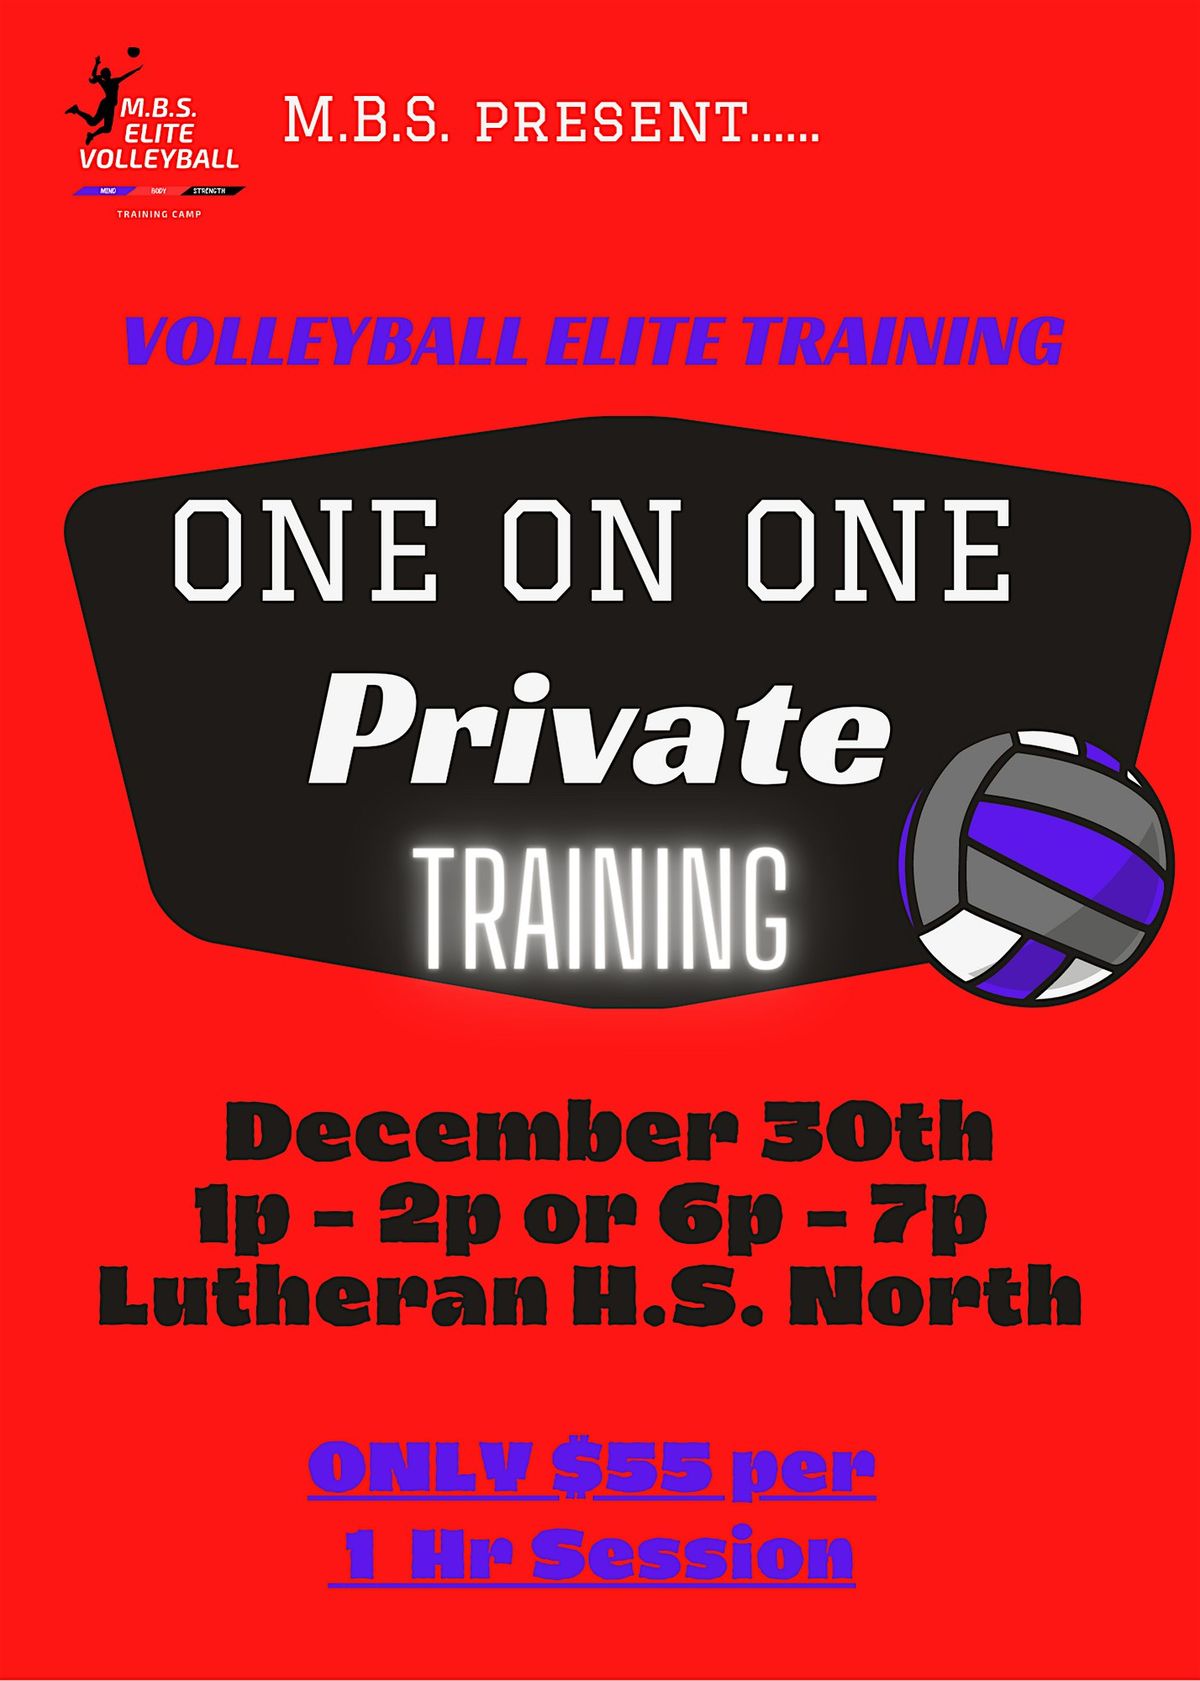 One on One Elite Volleyball Training